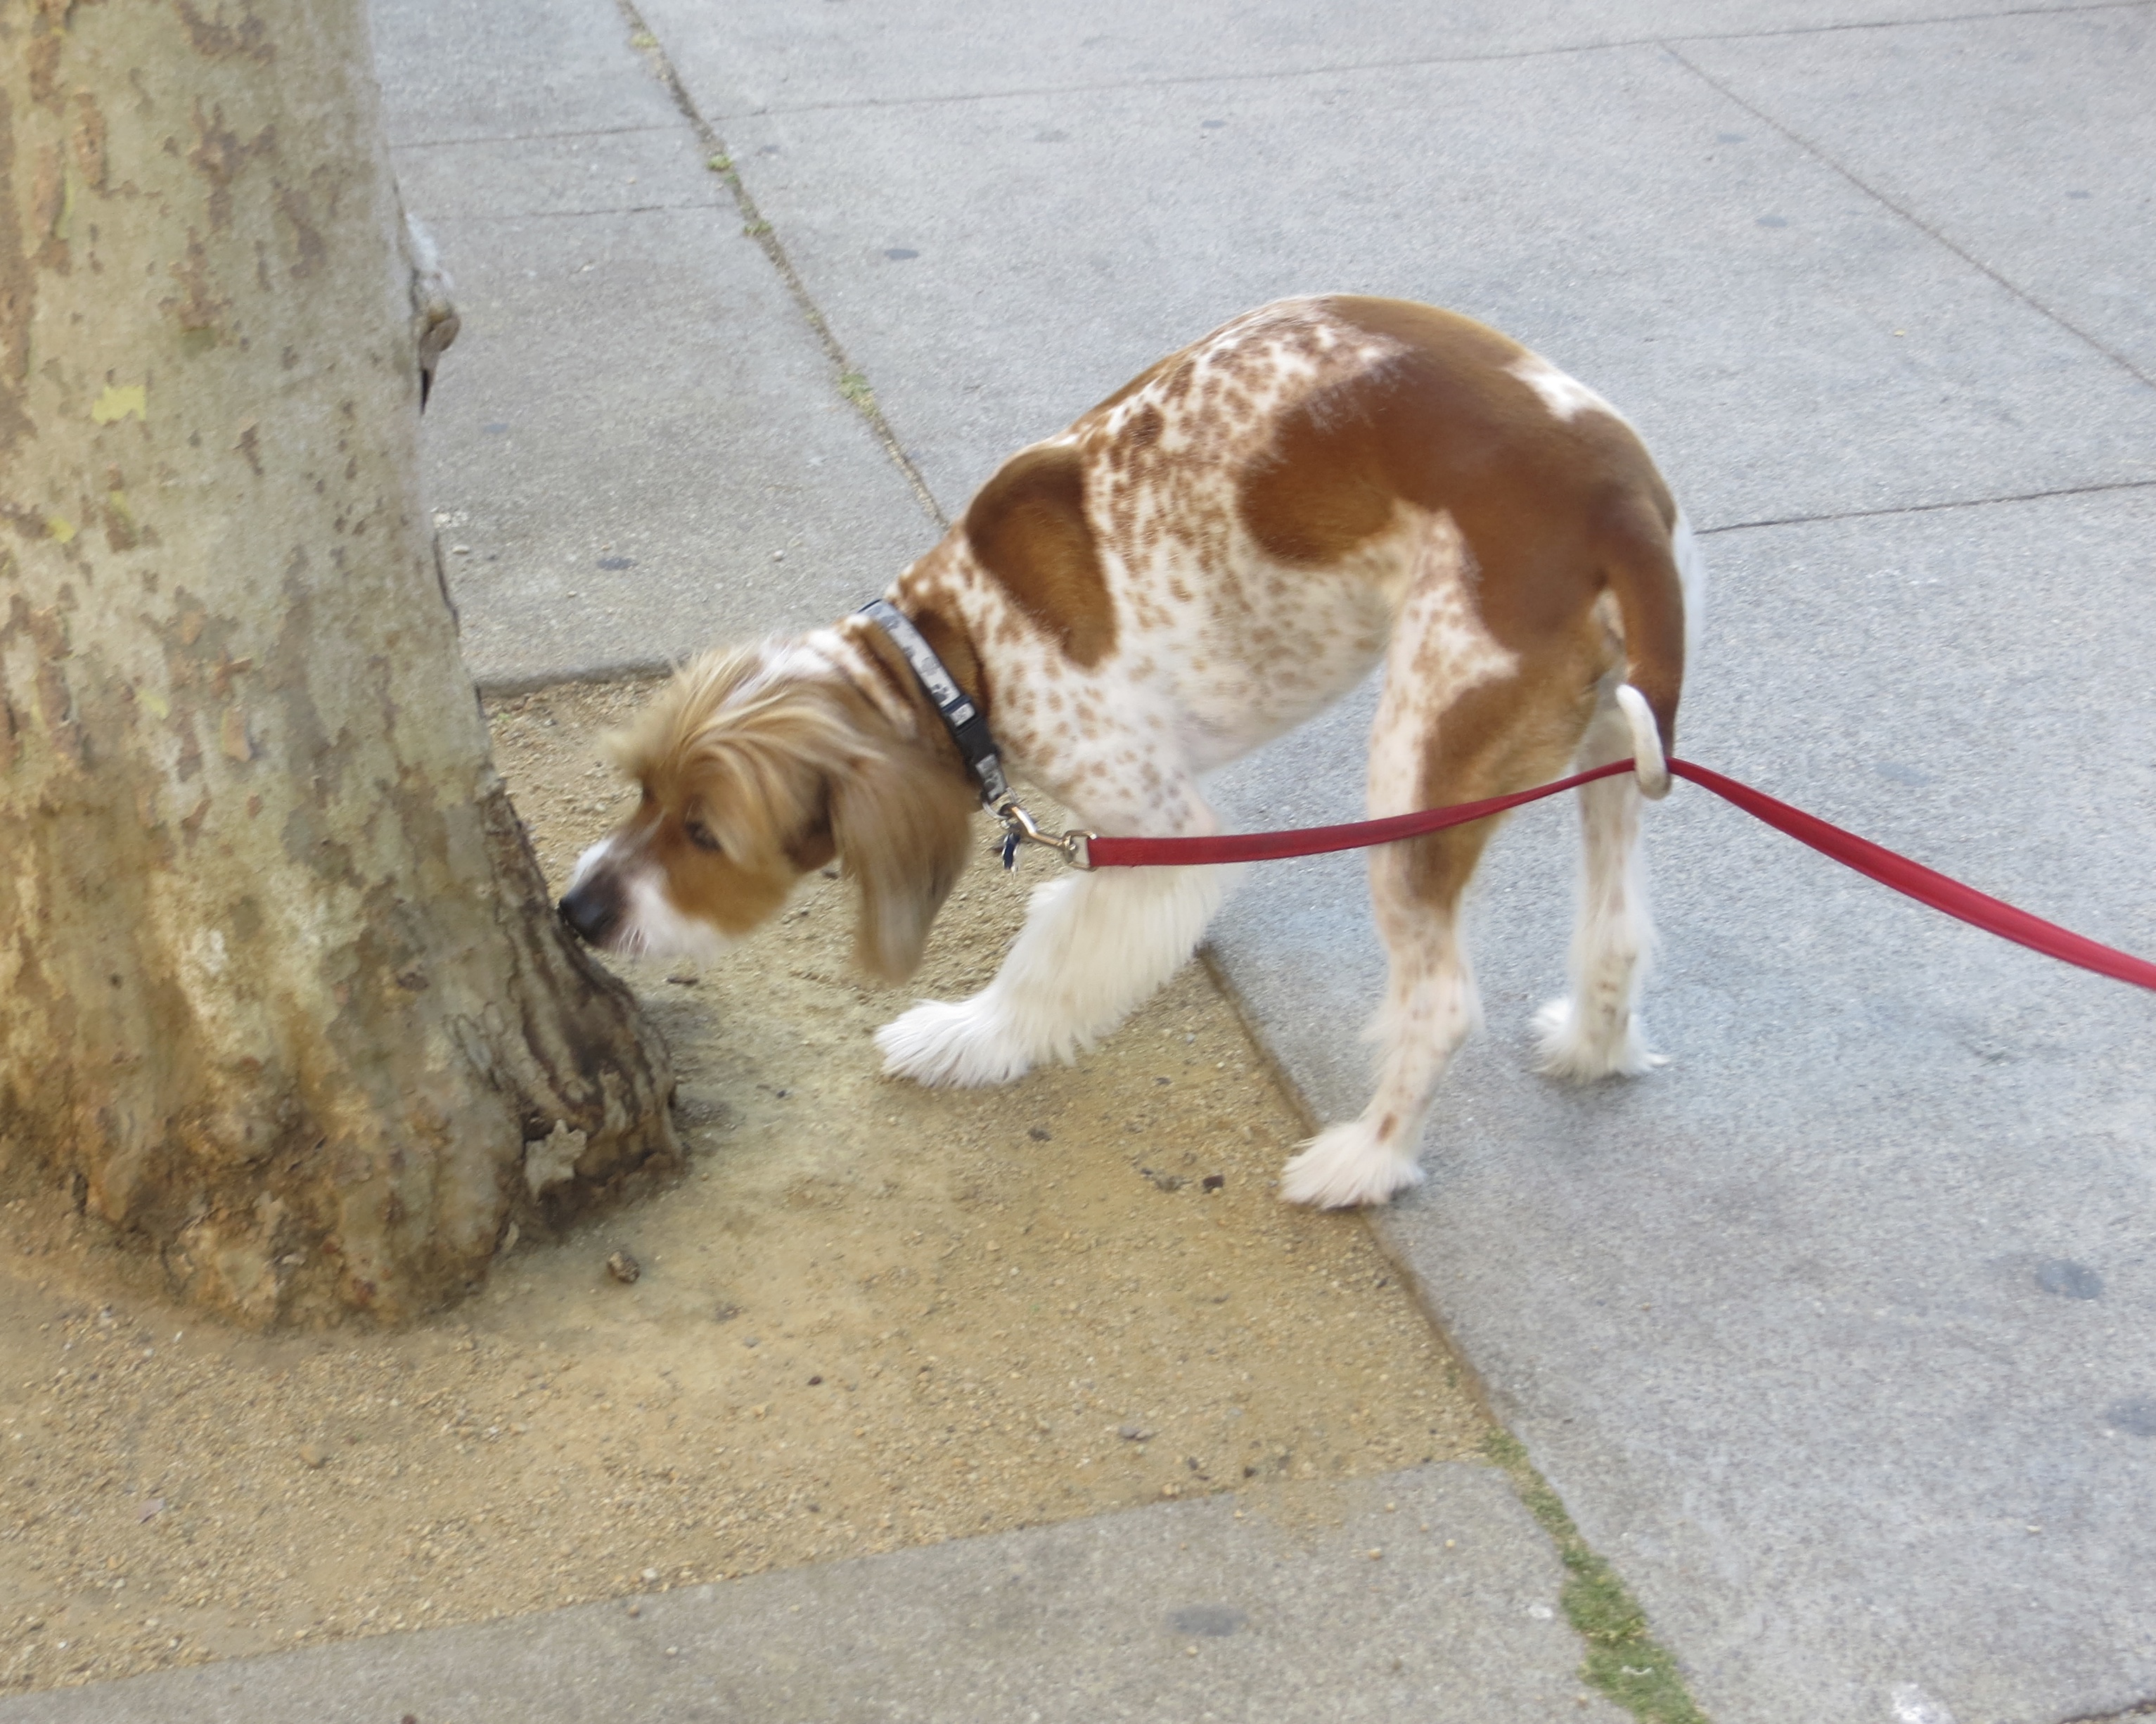 Red And White Brittany Spaniel/Jack Russell Terrier Mix Sniffing A Tree As He Holds His Leash Up With His Tail